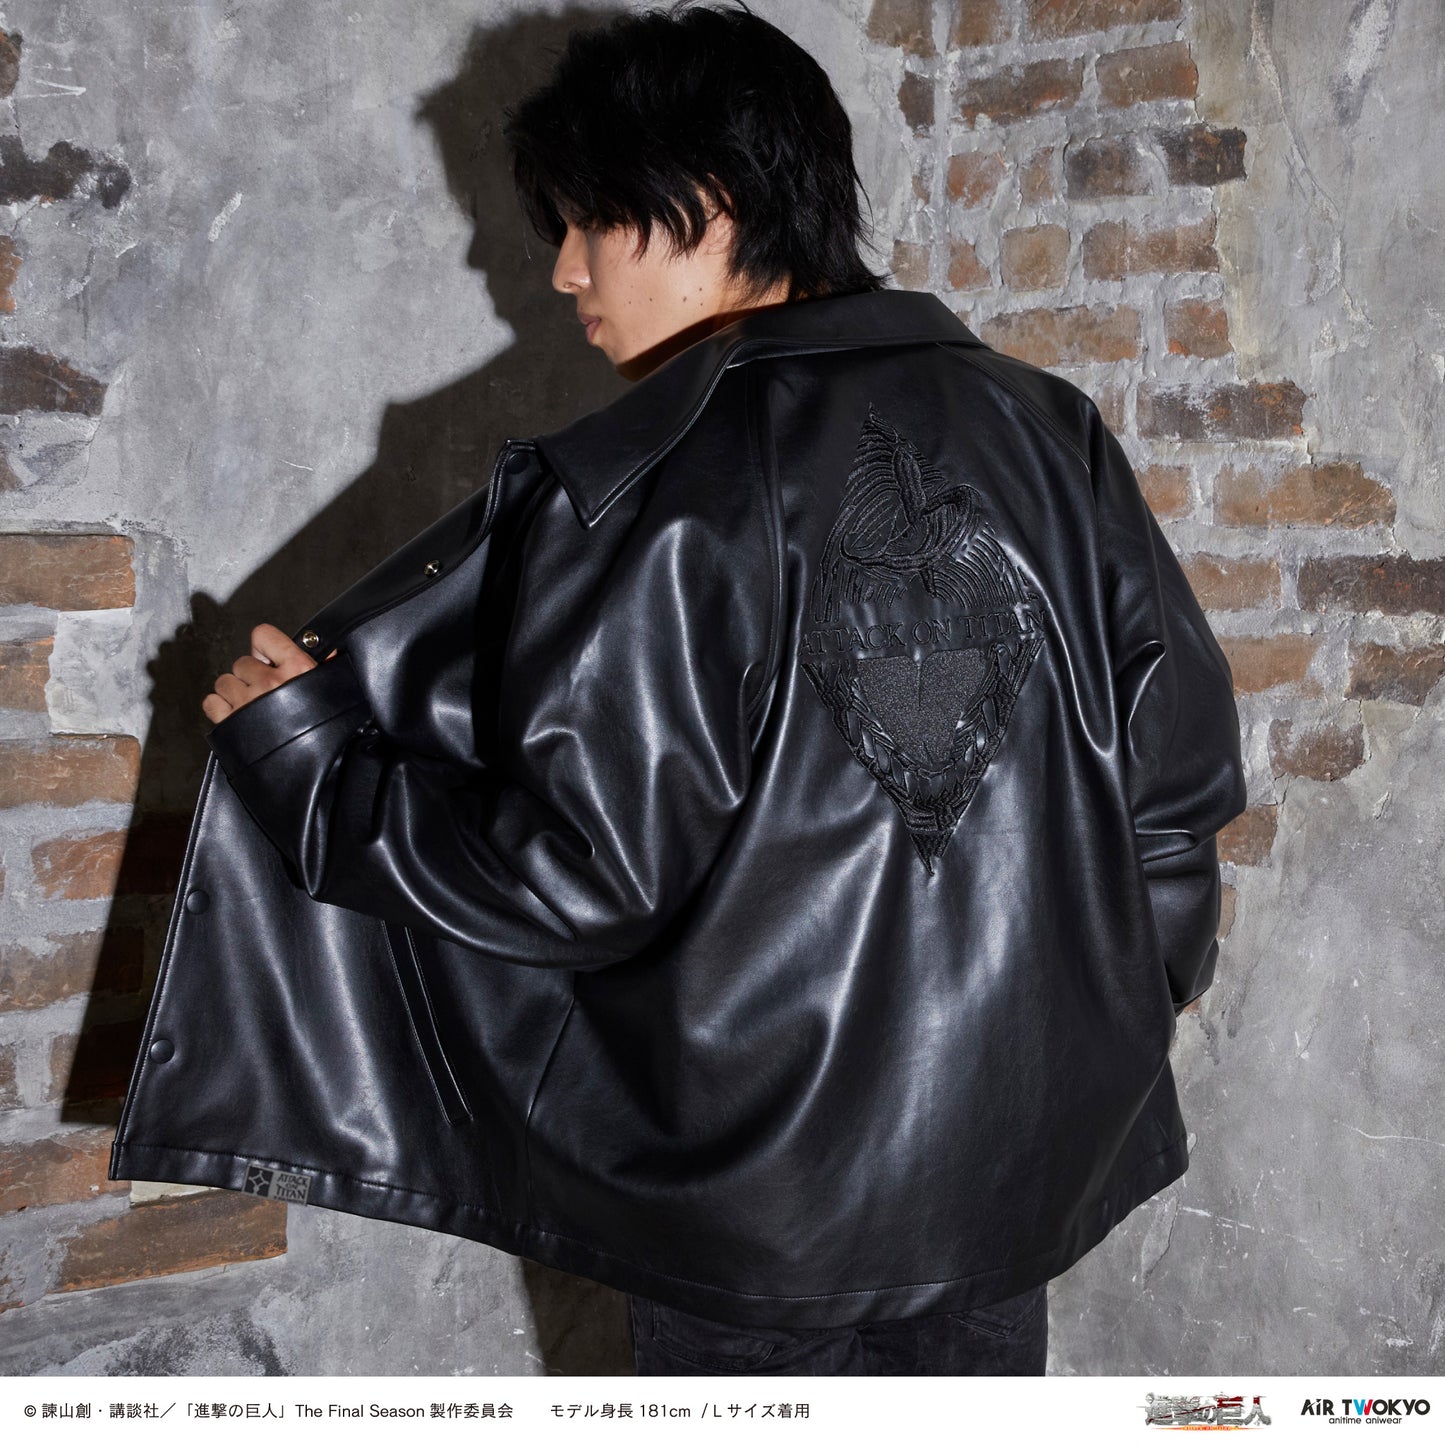  “Attack on Titan” The Final Season  Eren Yeager  synthetic leather jacket